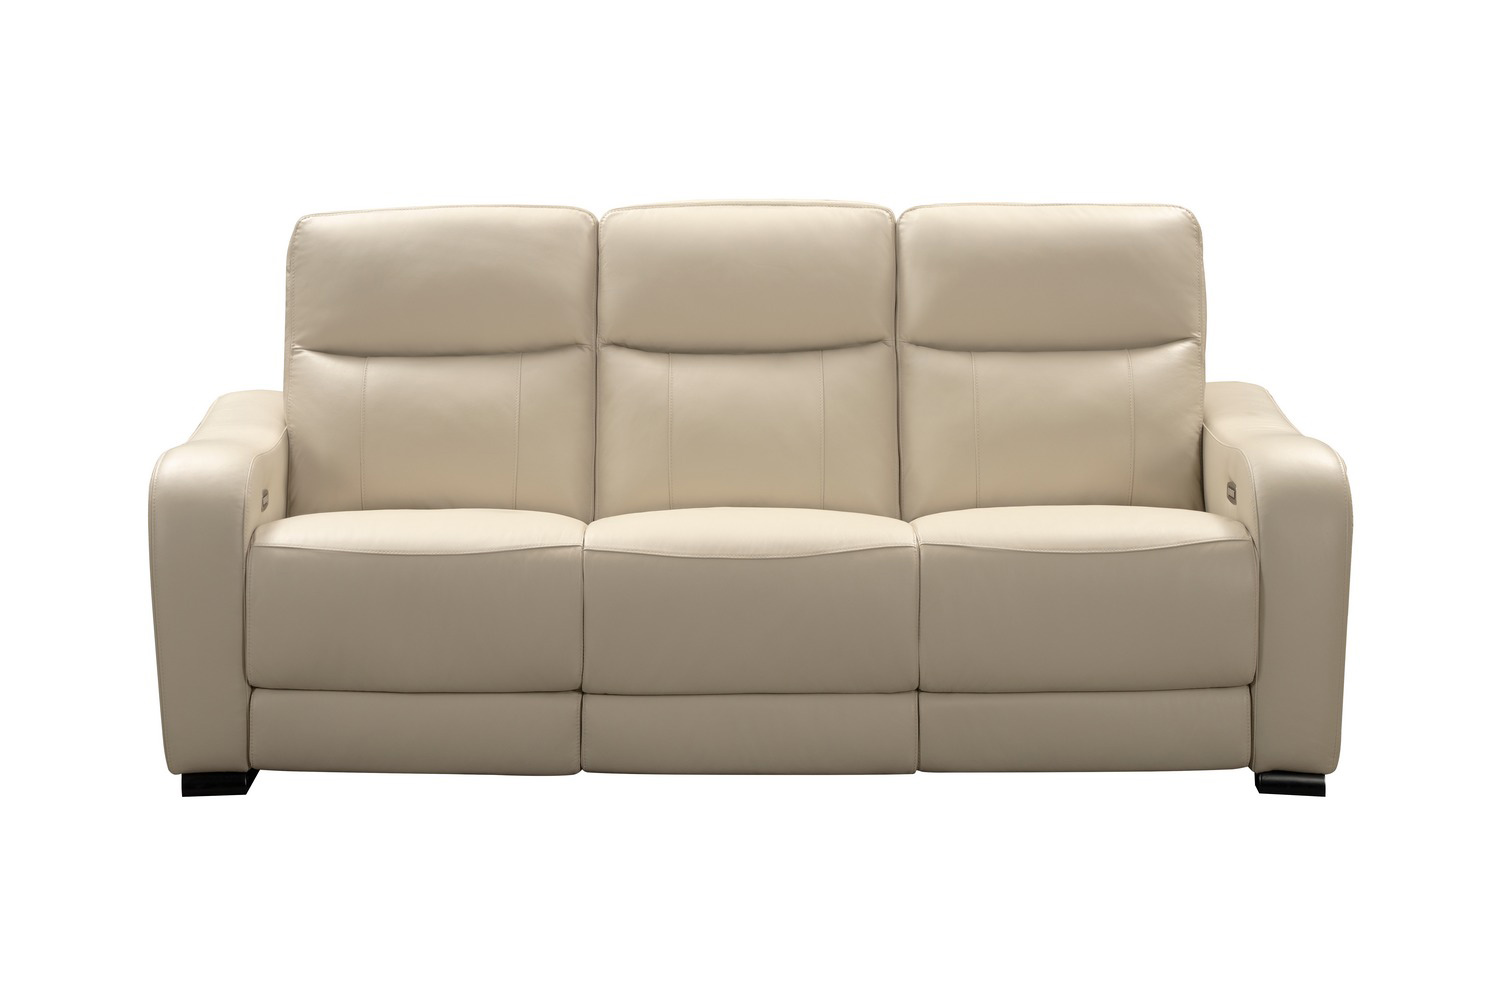 Barcalounger Electra Power Reclining Sofa with Power Head Rests and Power Lumbar - Laurel Cream/Leather Match